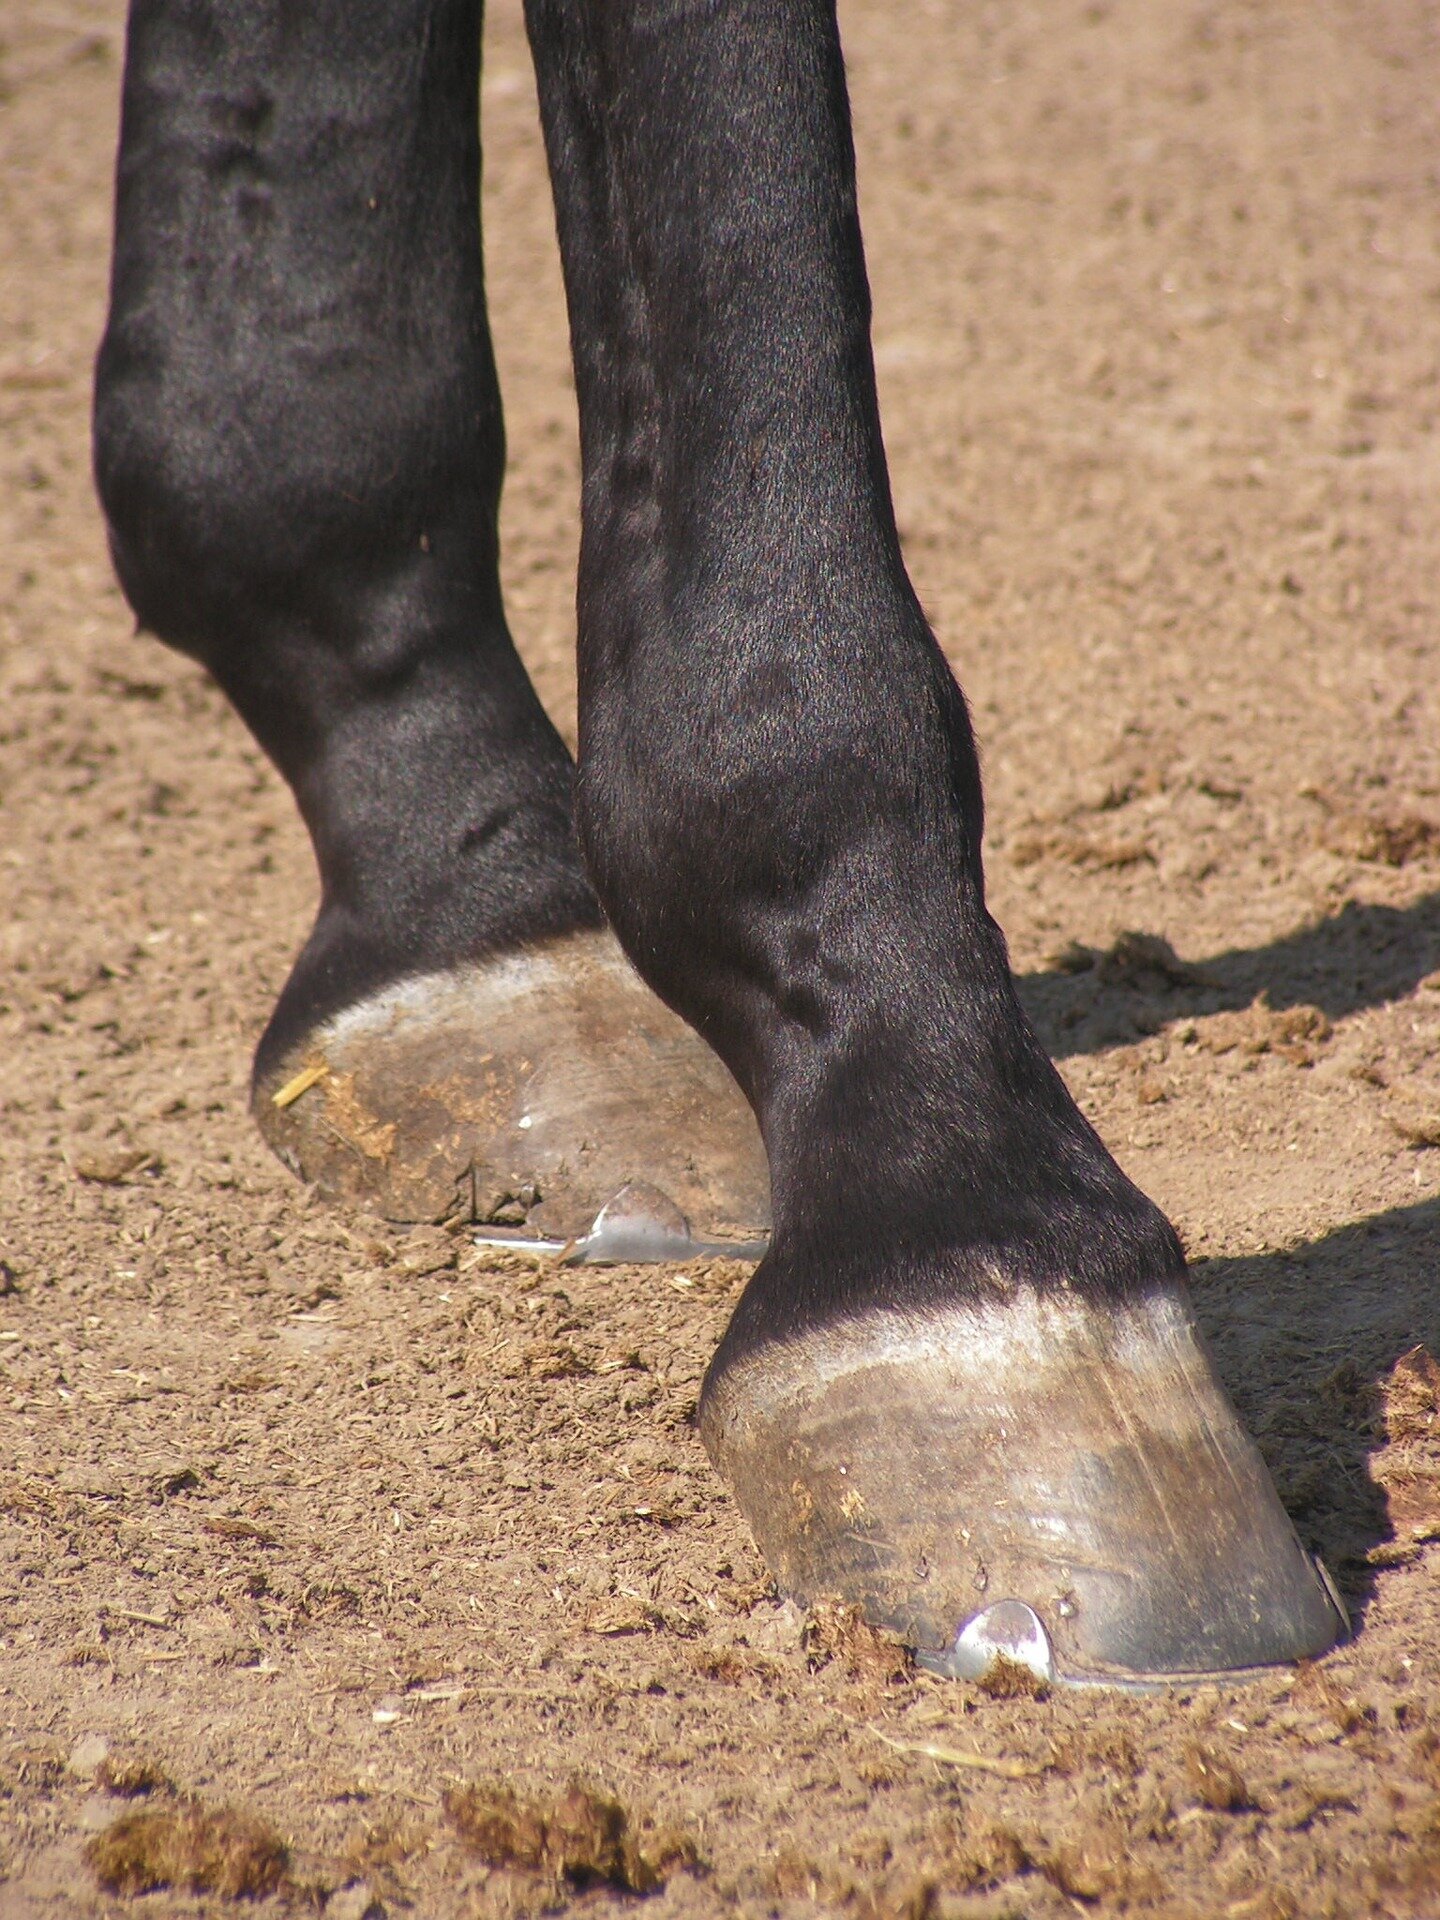 Is one toe really better than three? How horse' legs evolved for travel